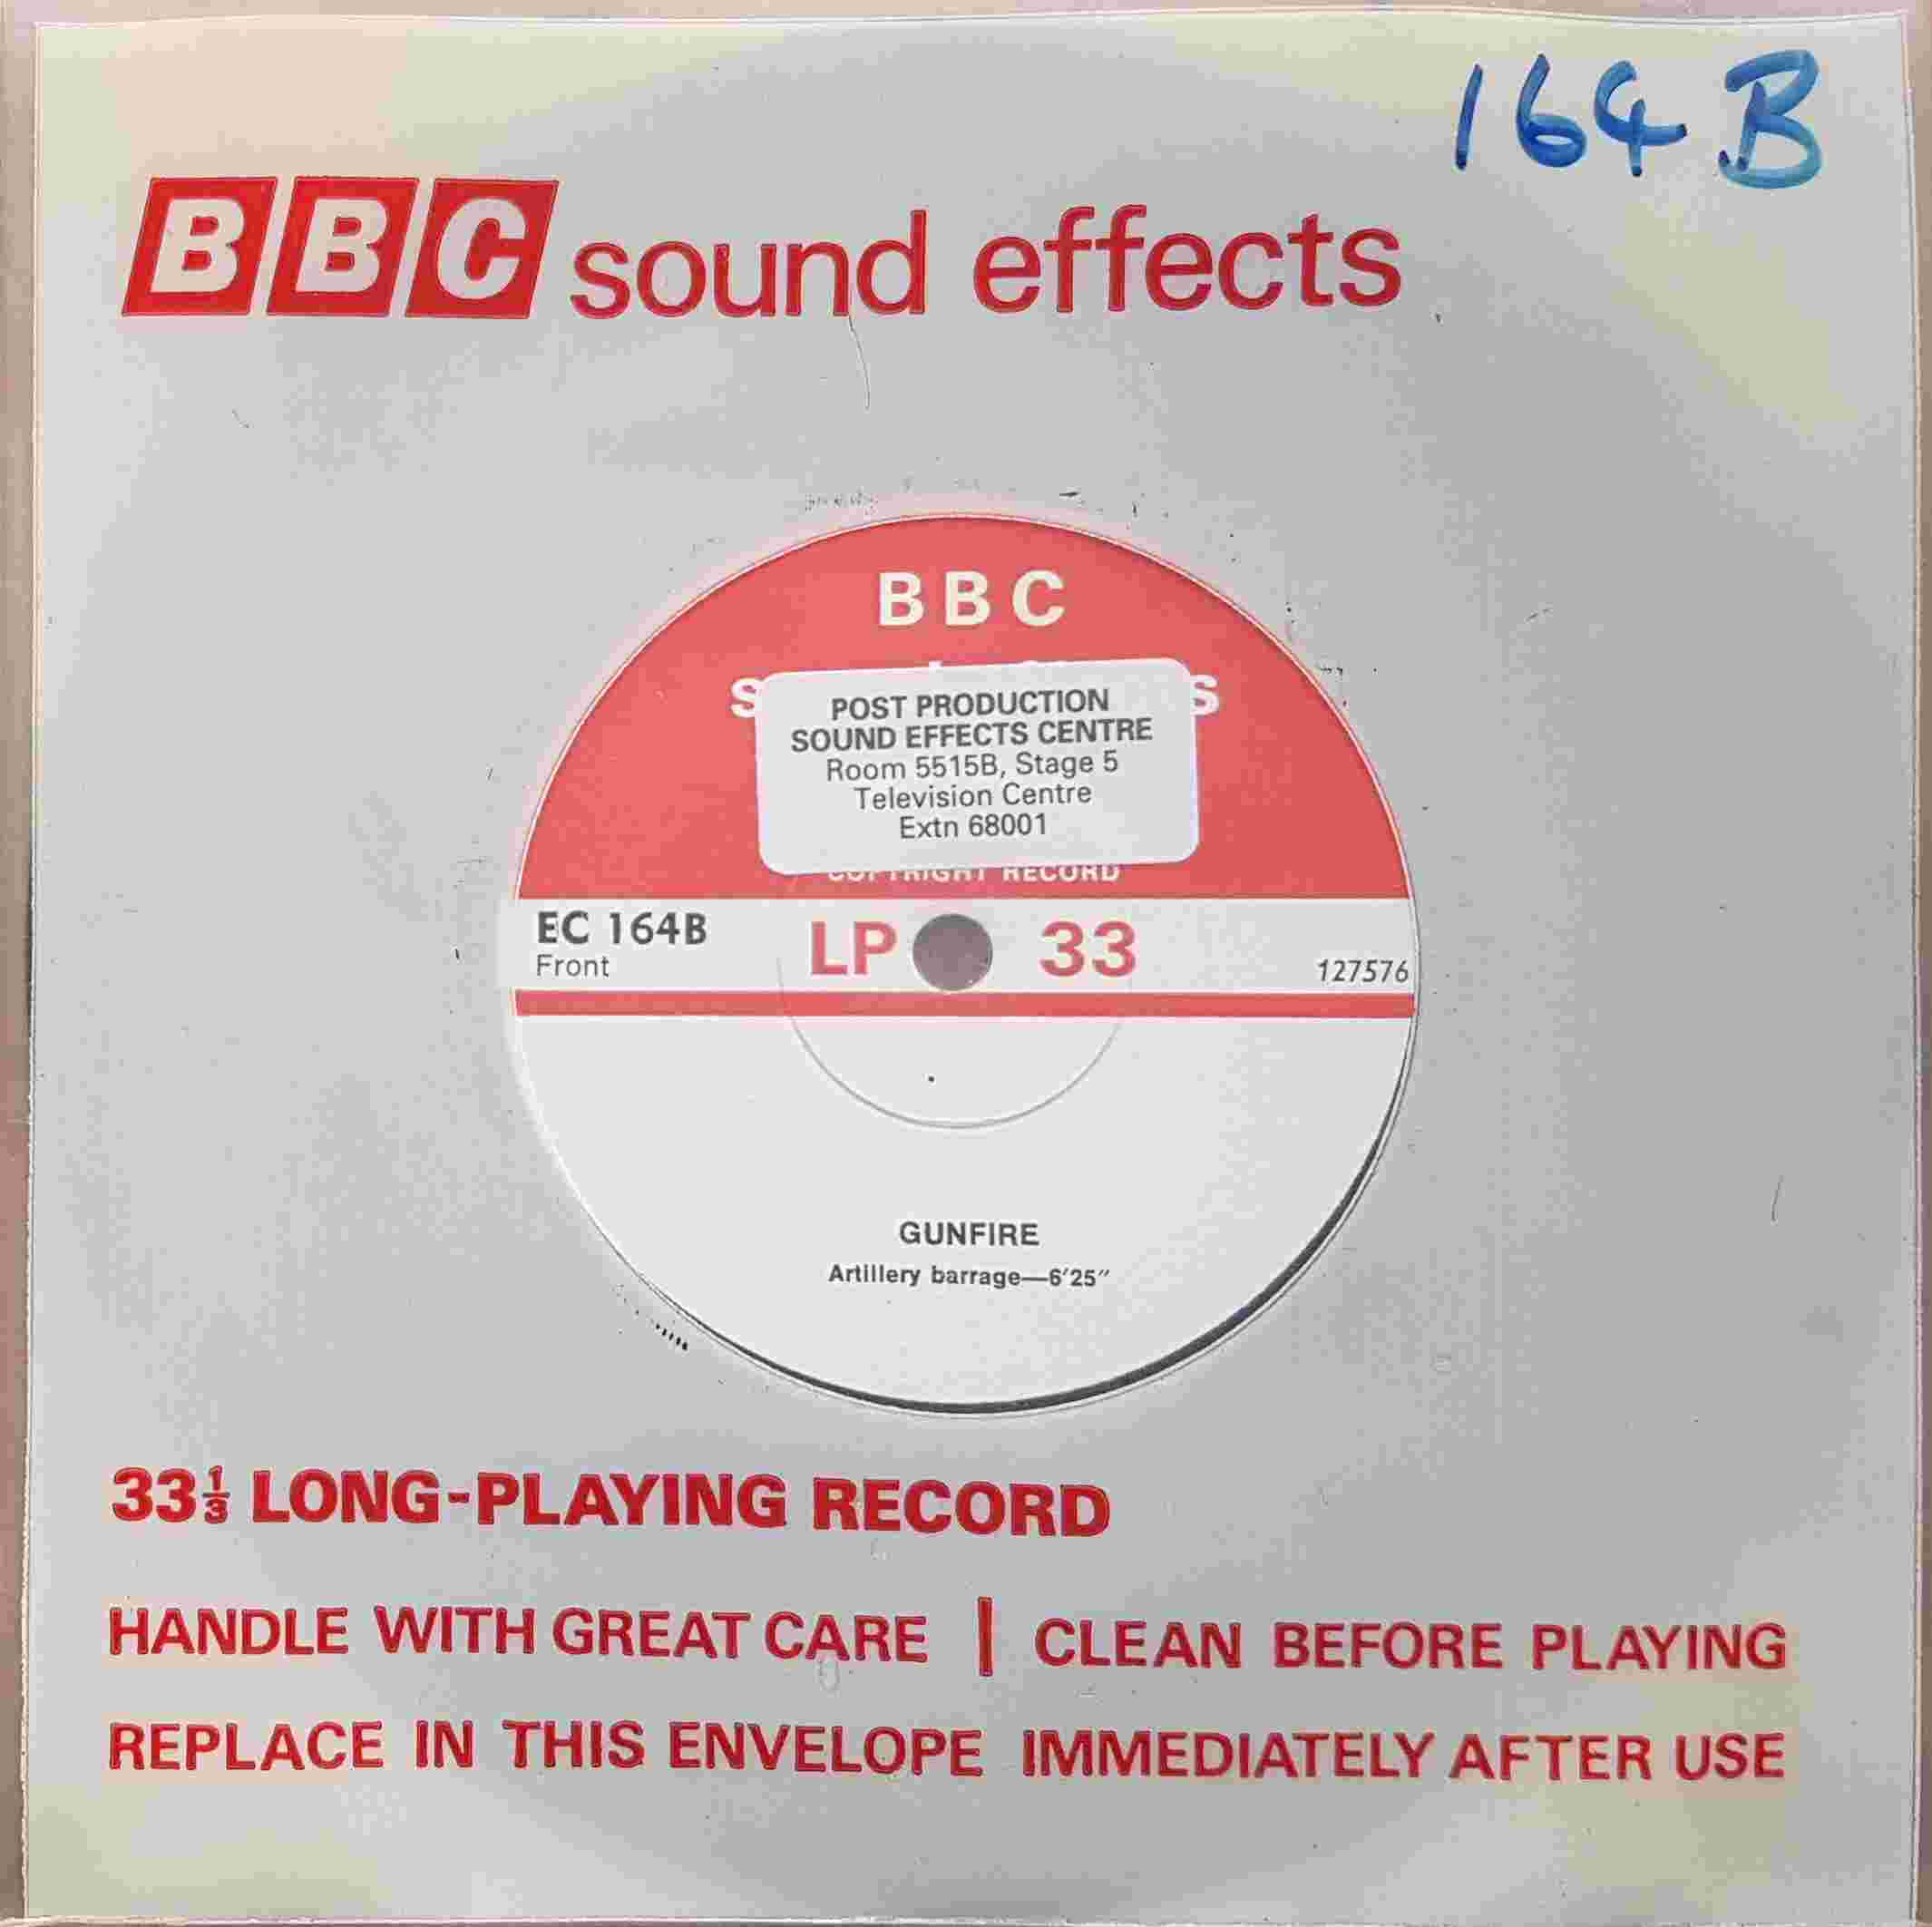 Picture of EC 164B Gunfire by artist Not registered from the BBC singles - Records and Tapes library